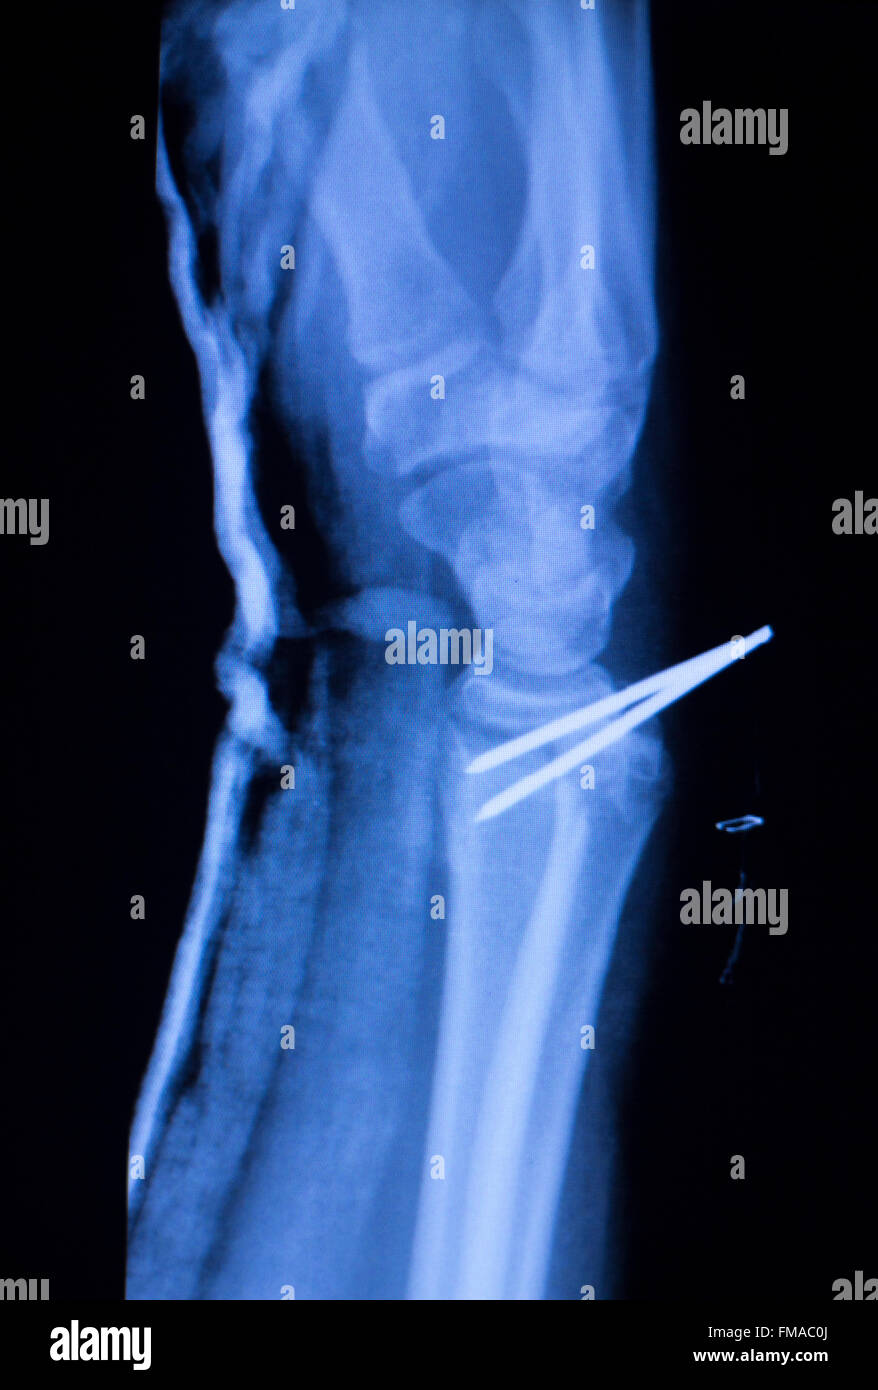 Forearm orthopedic titanium metal replacement implant xray scan test reults. Stock Photo